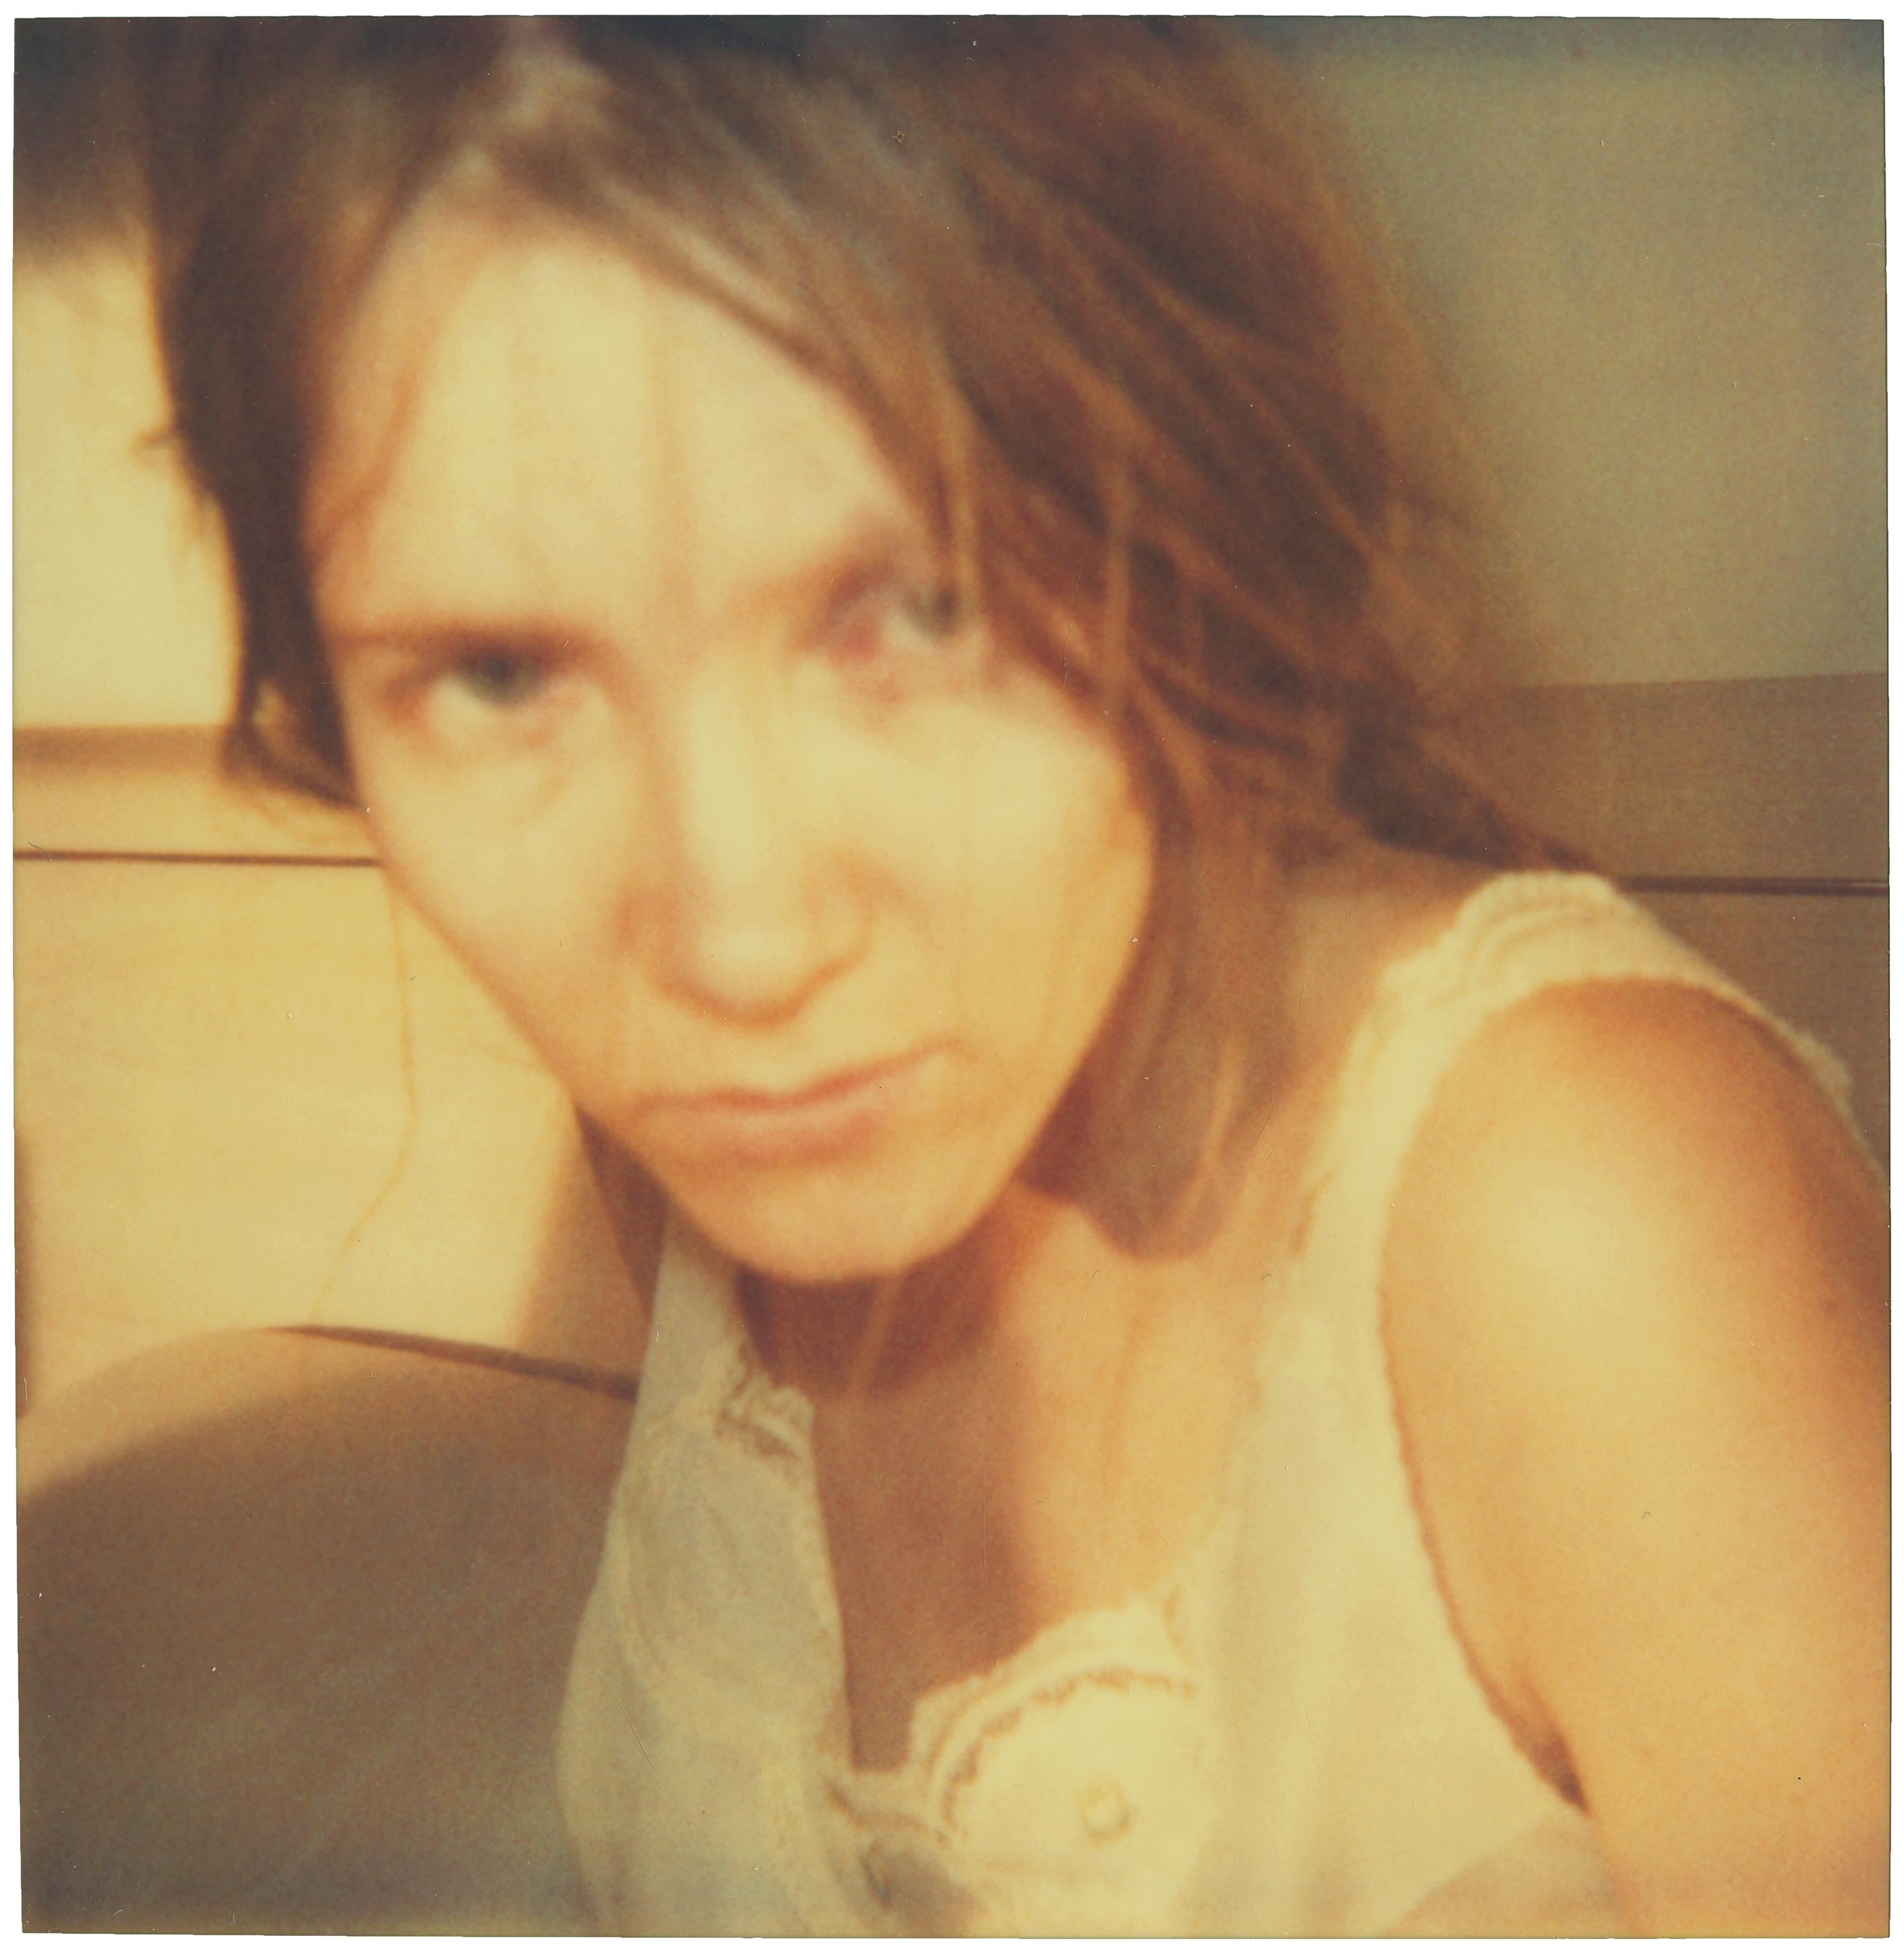 Hillview Motel (Last Picture Show) - analog, mounted, based on 3 Polaroids - Brown Color Photograph by Stefanie Schneider